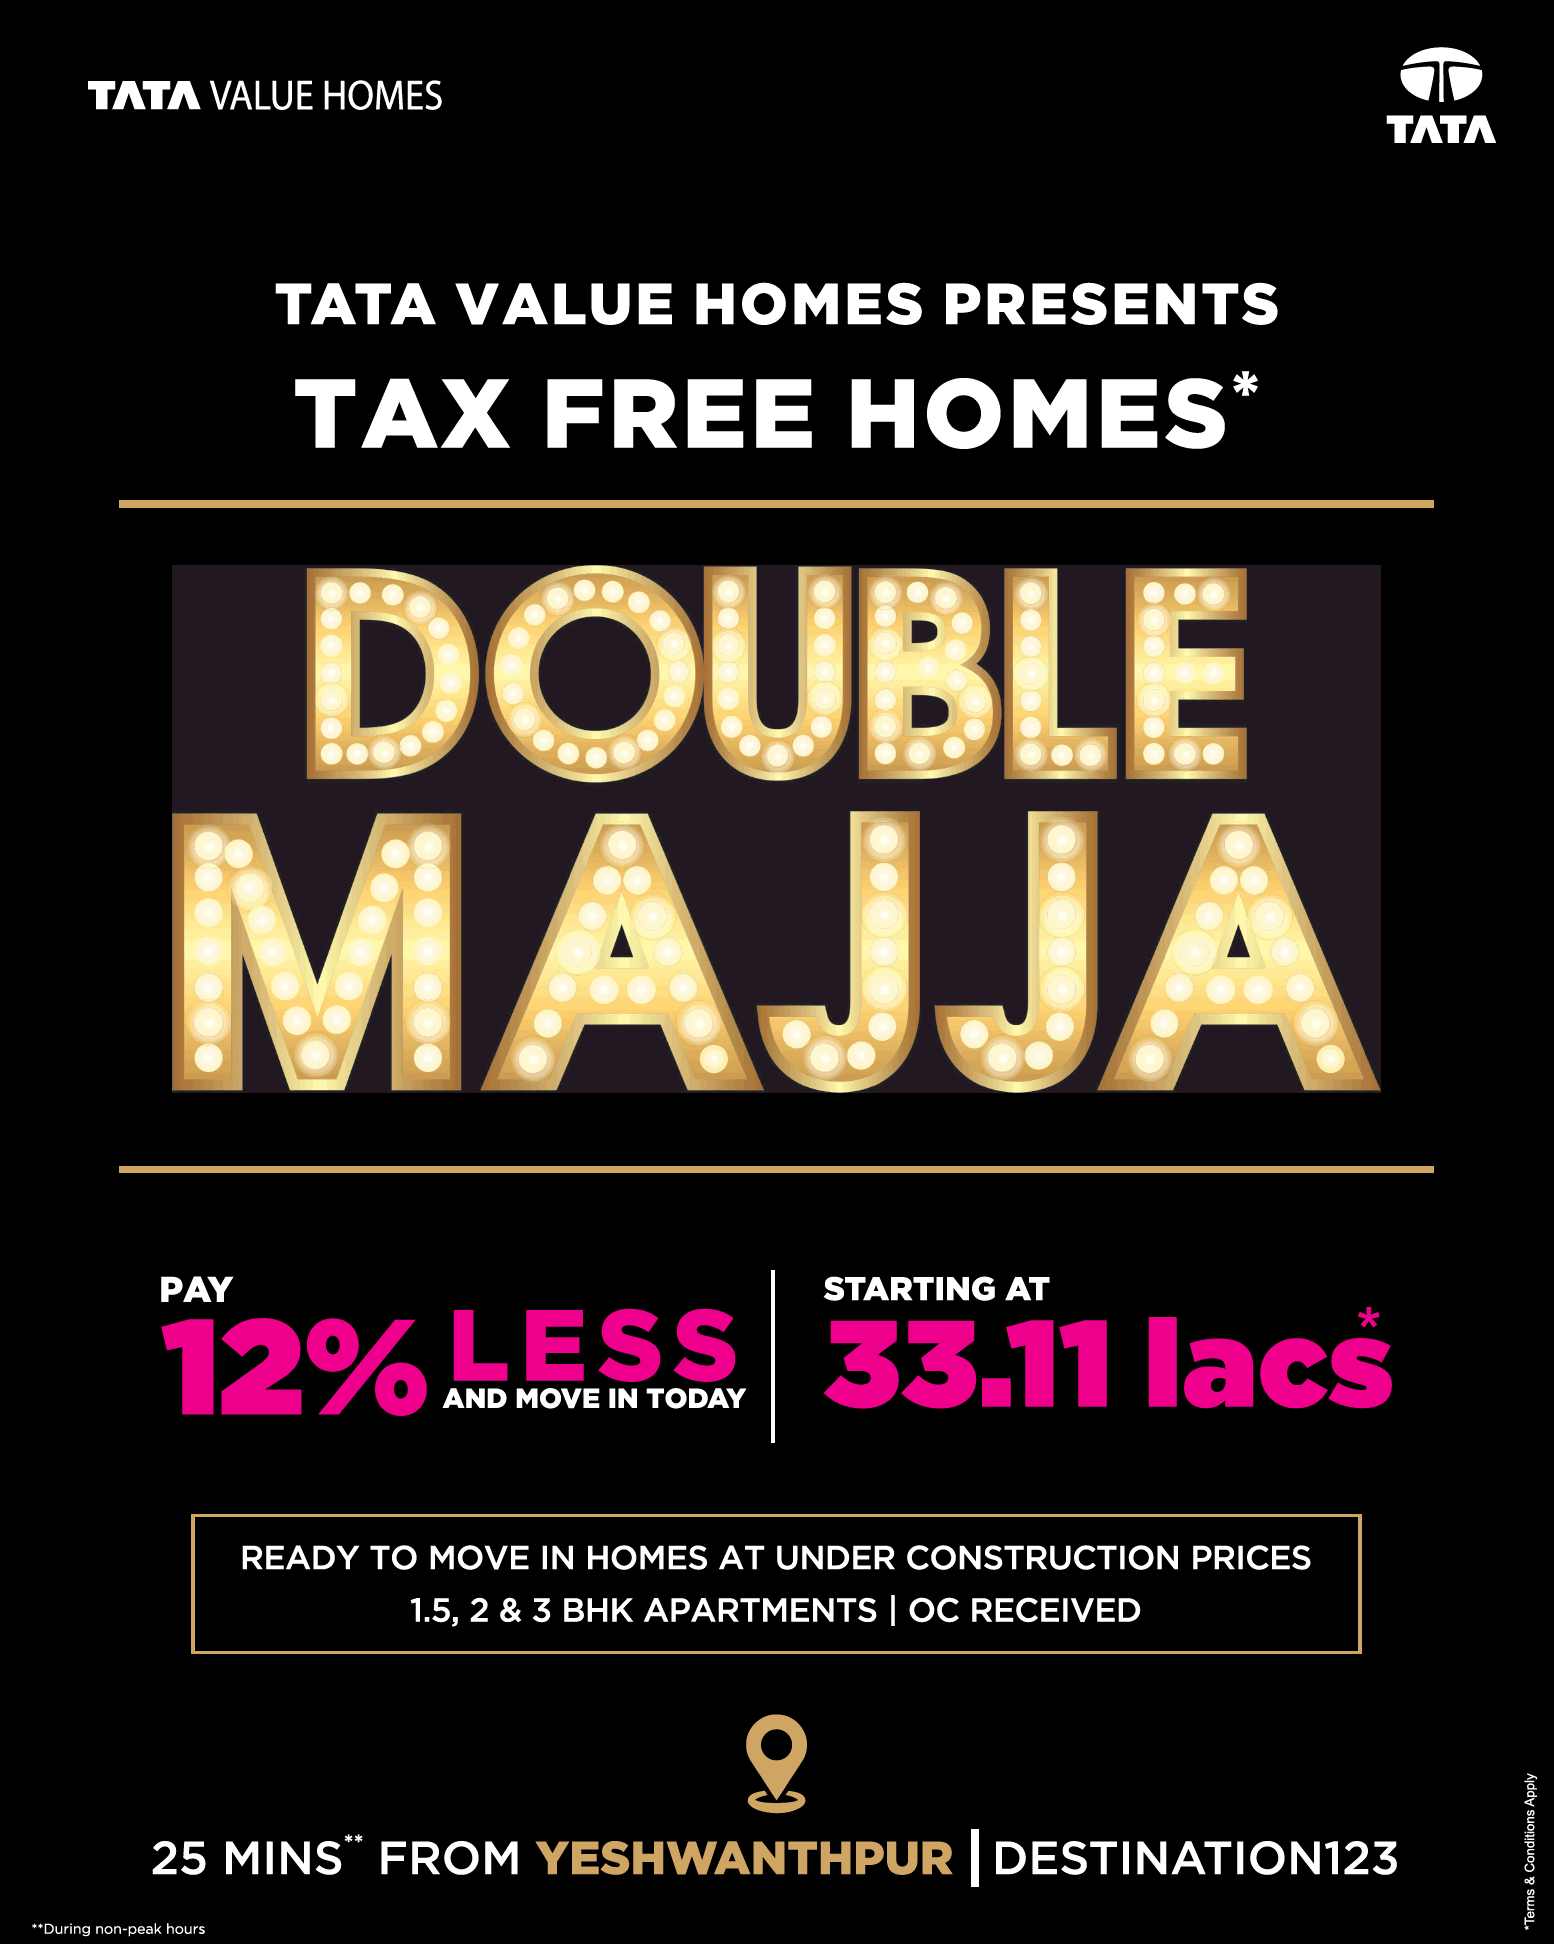 Pay 12% less and move in today at Tata New Haven in Bangalore Update